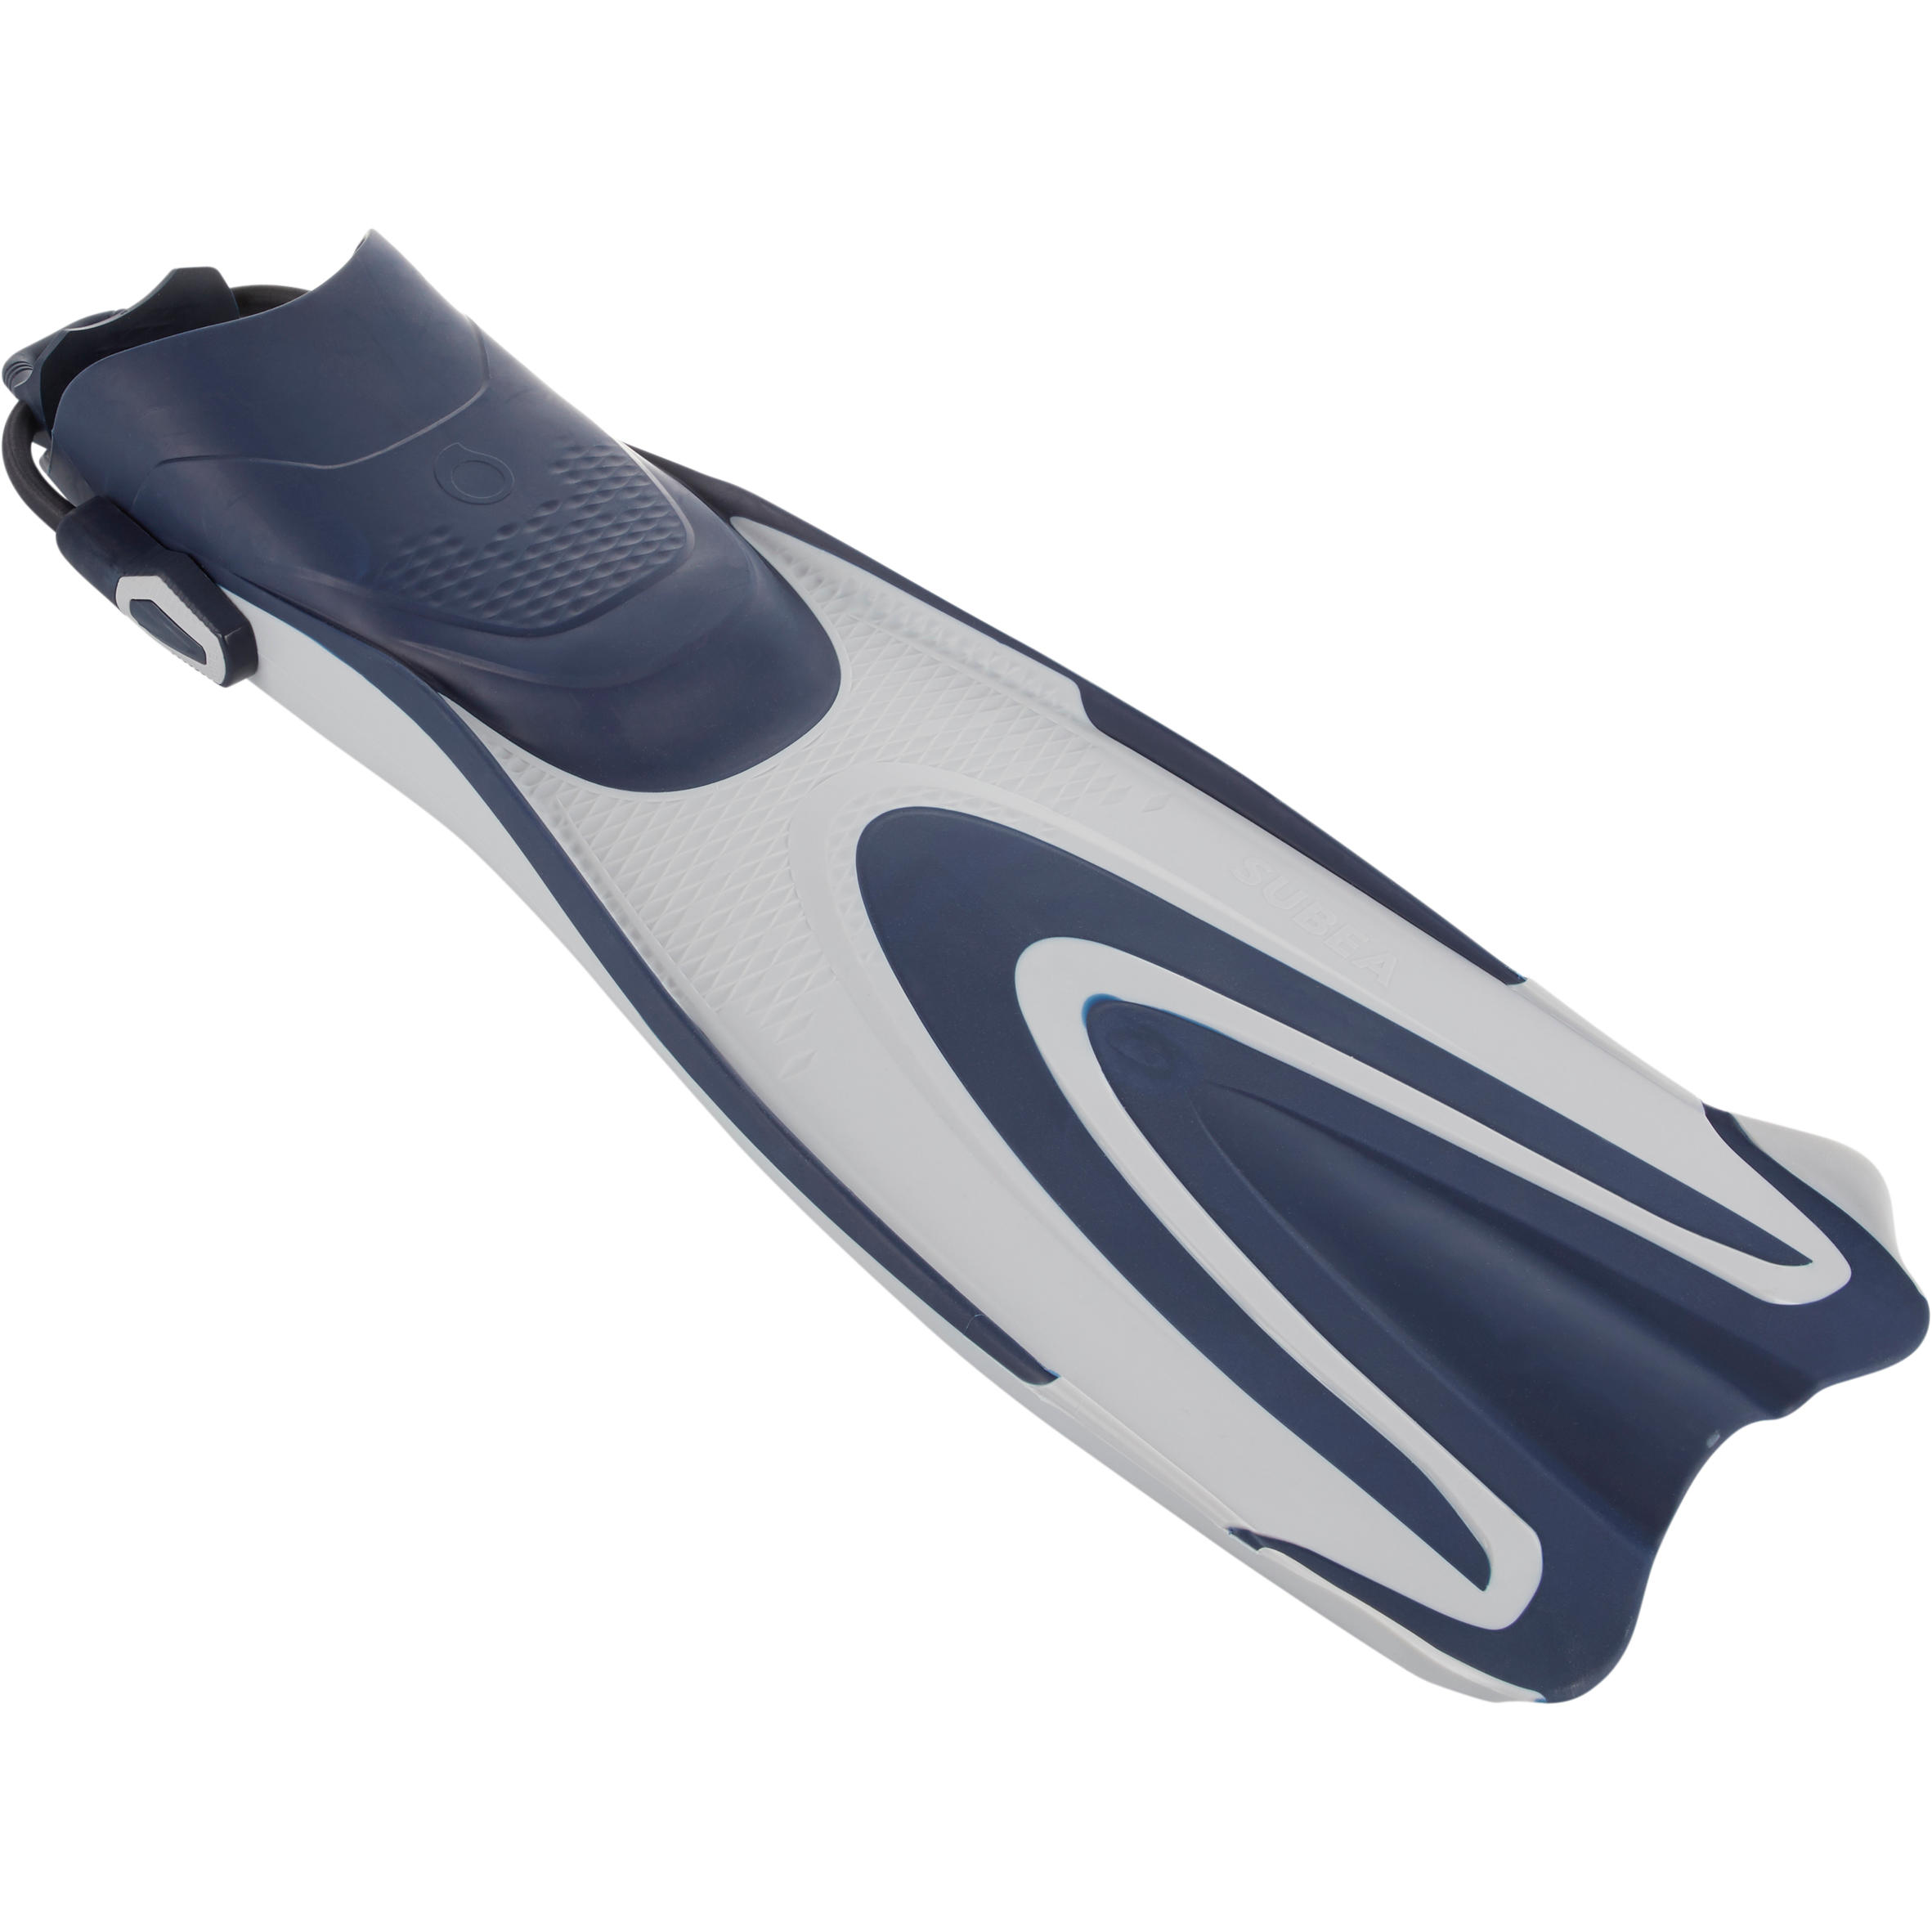 SUBEA Diving fins adjustable OH 500 soft pearl grey